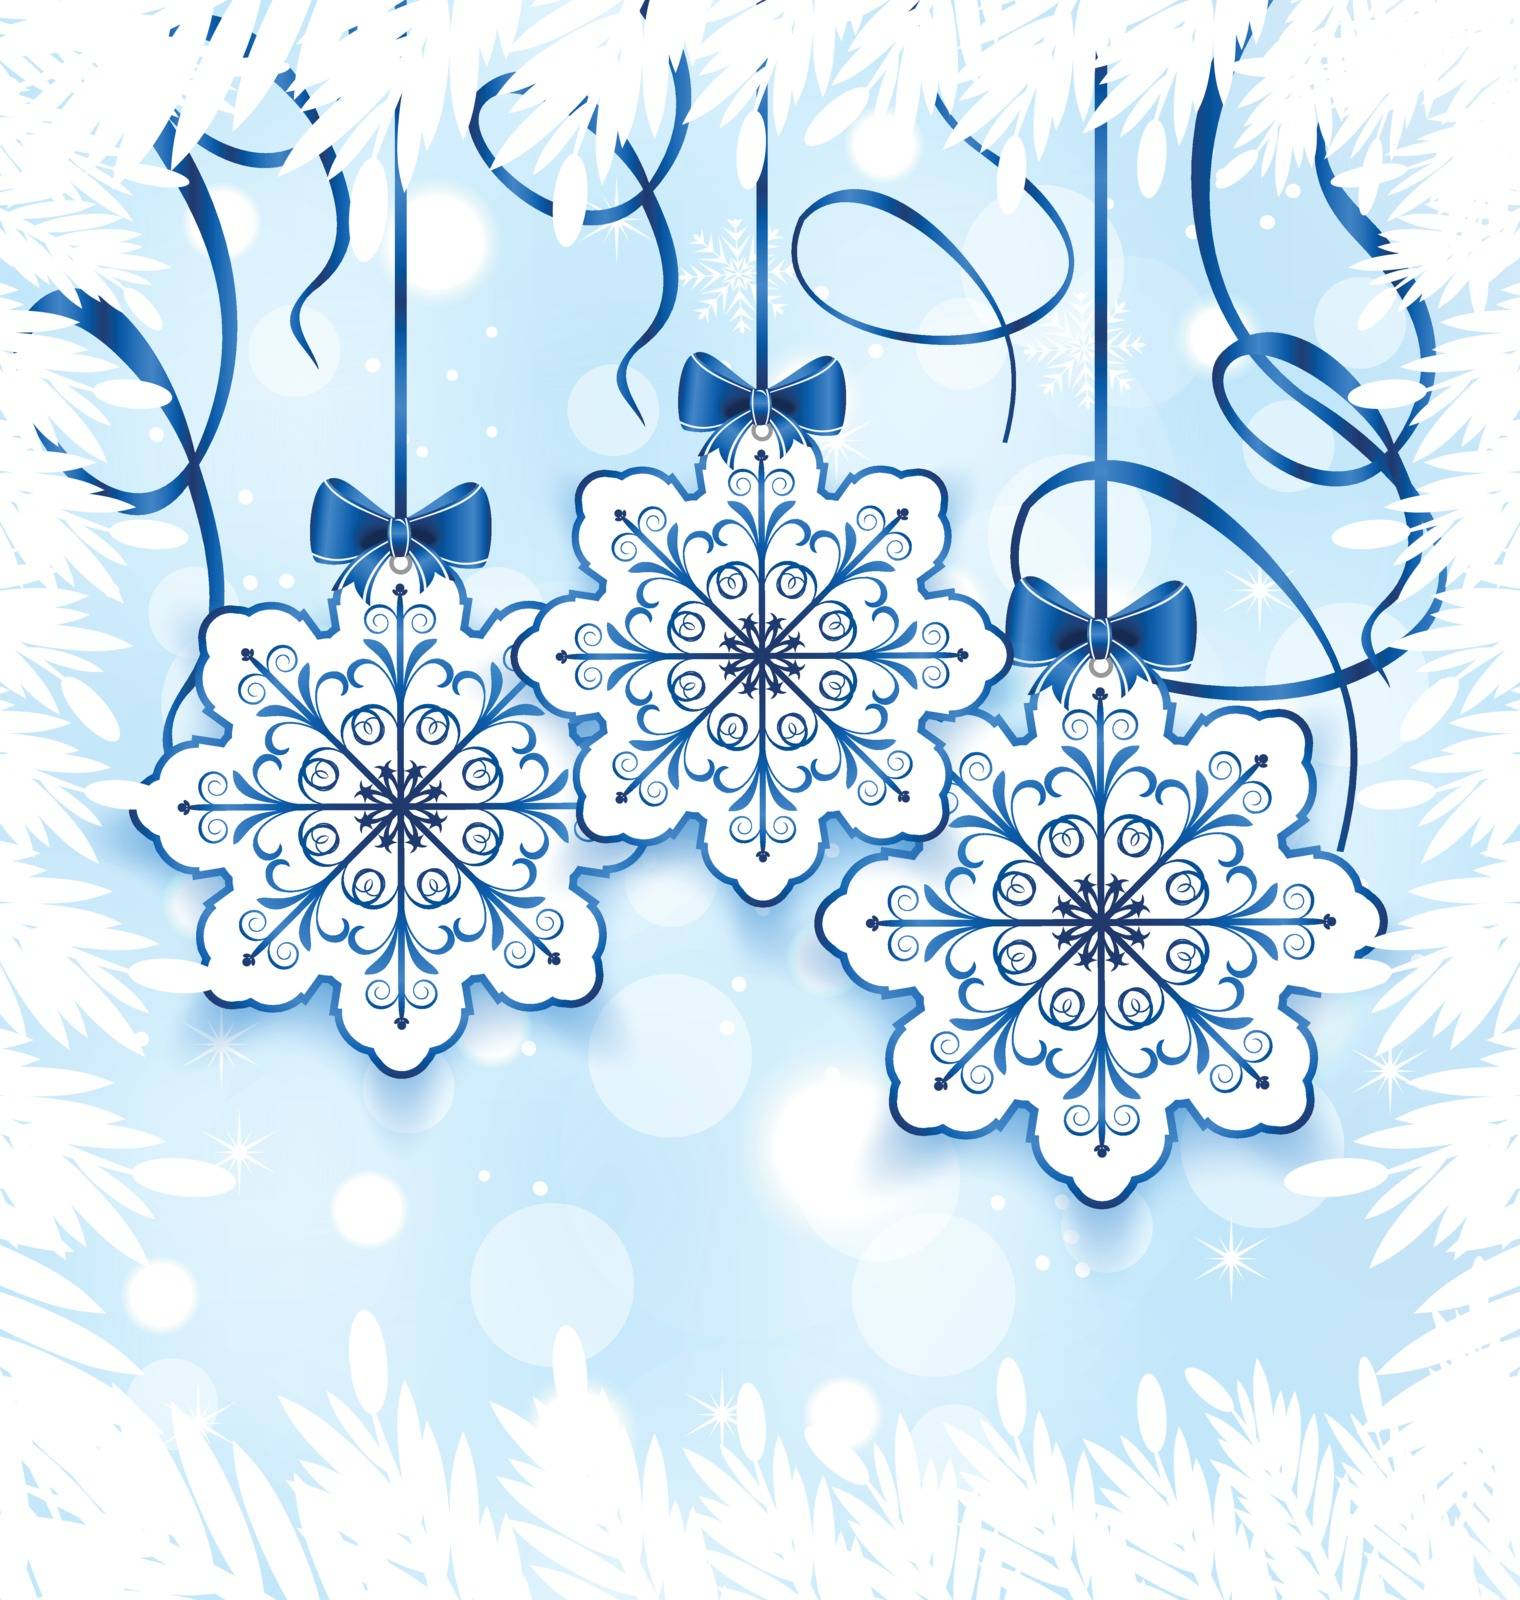 Illustration Christmas snowflakes with bow, winter decoration - vector